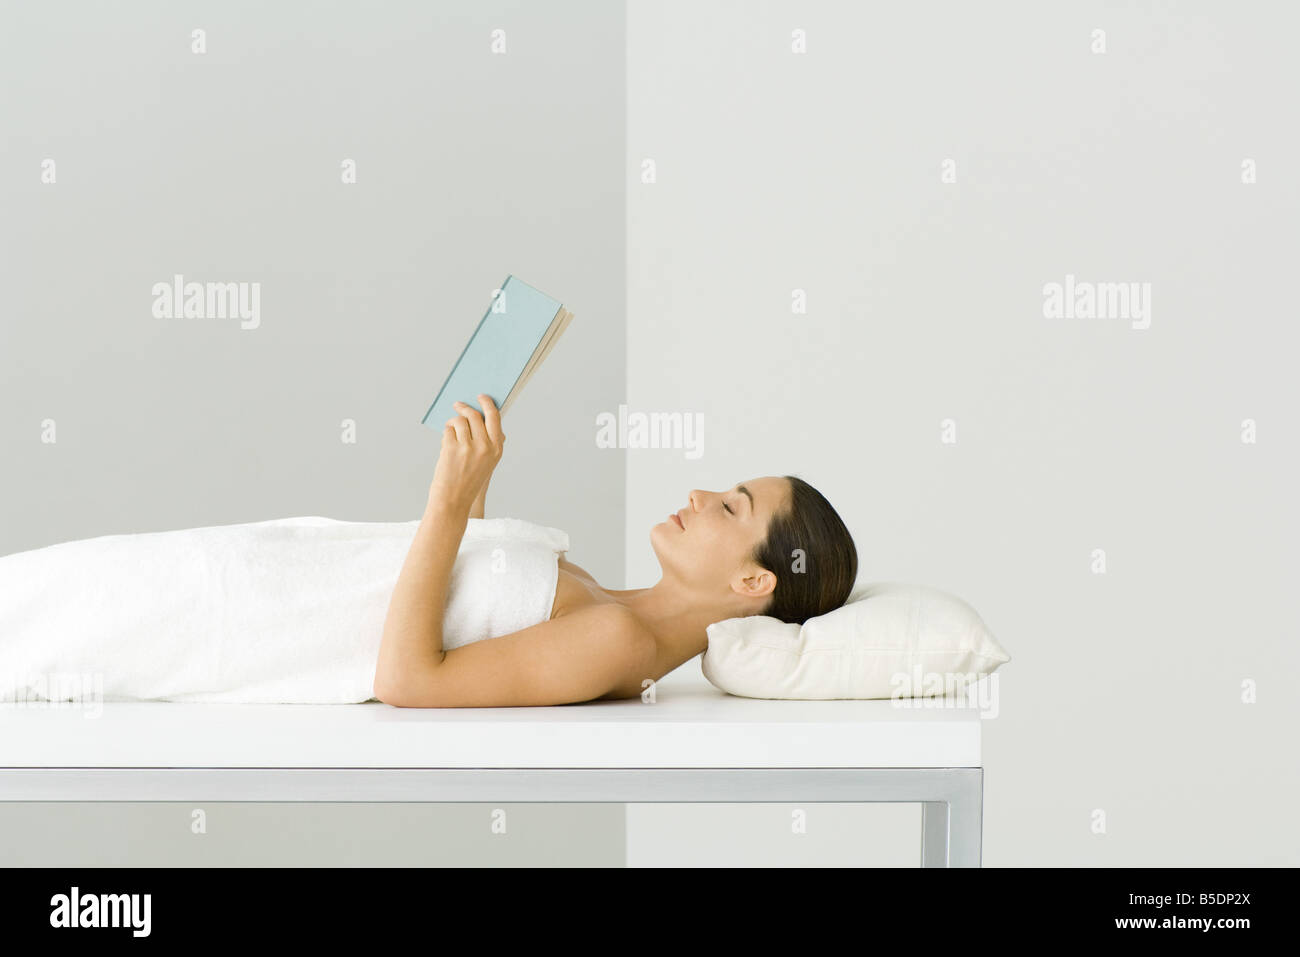 Woman wrapped in towel, lying on massage table, holding book, eyes closed Stock Photo